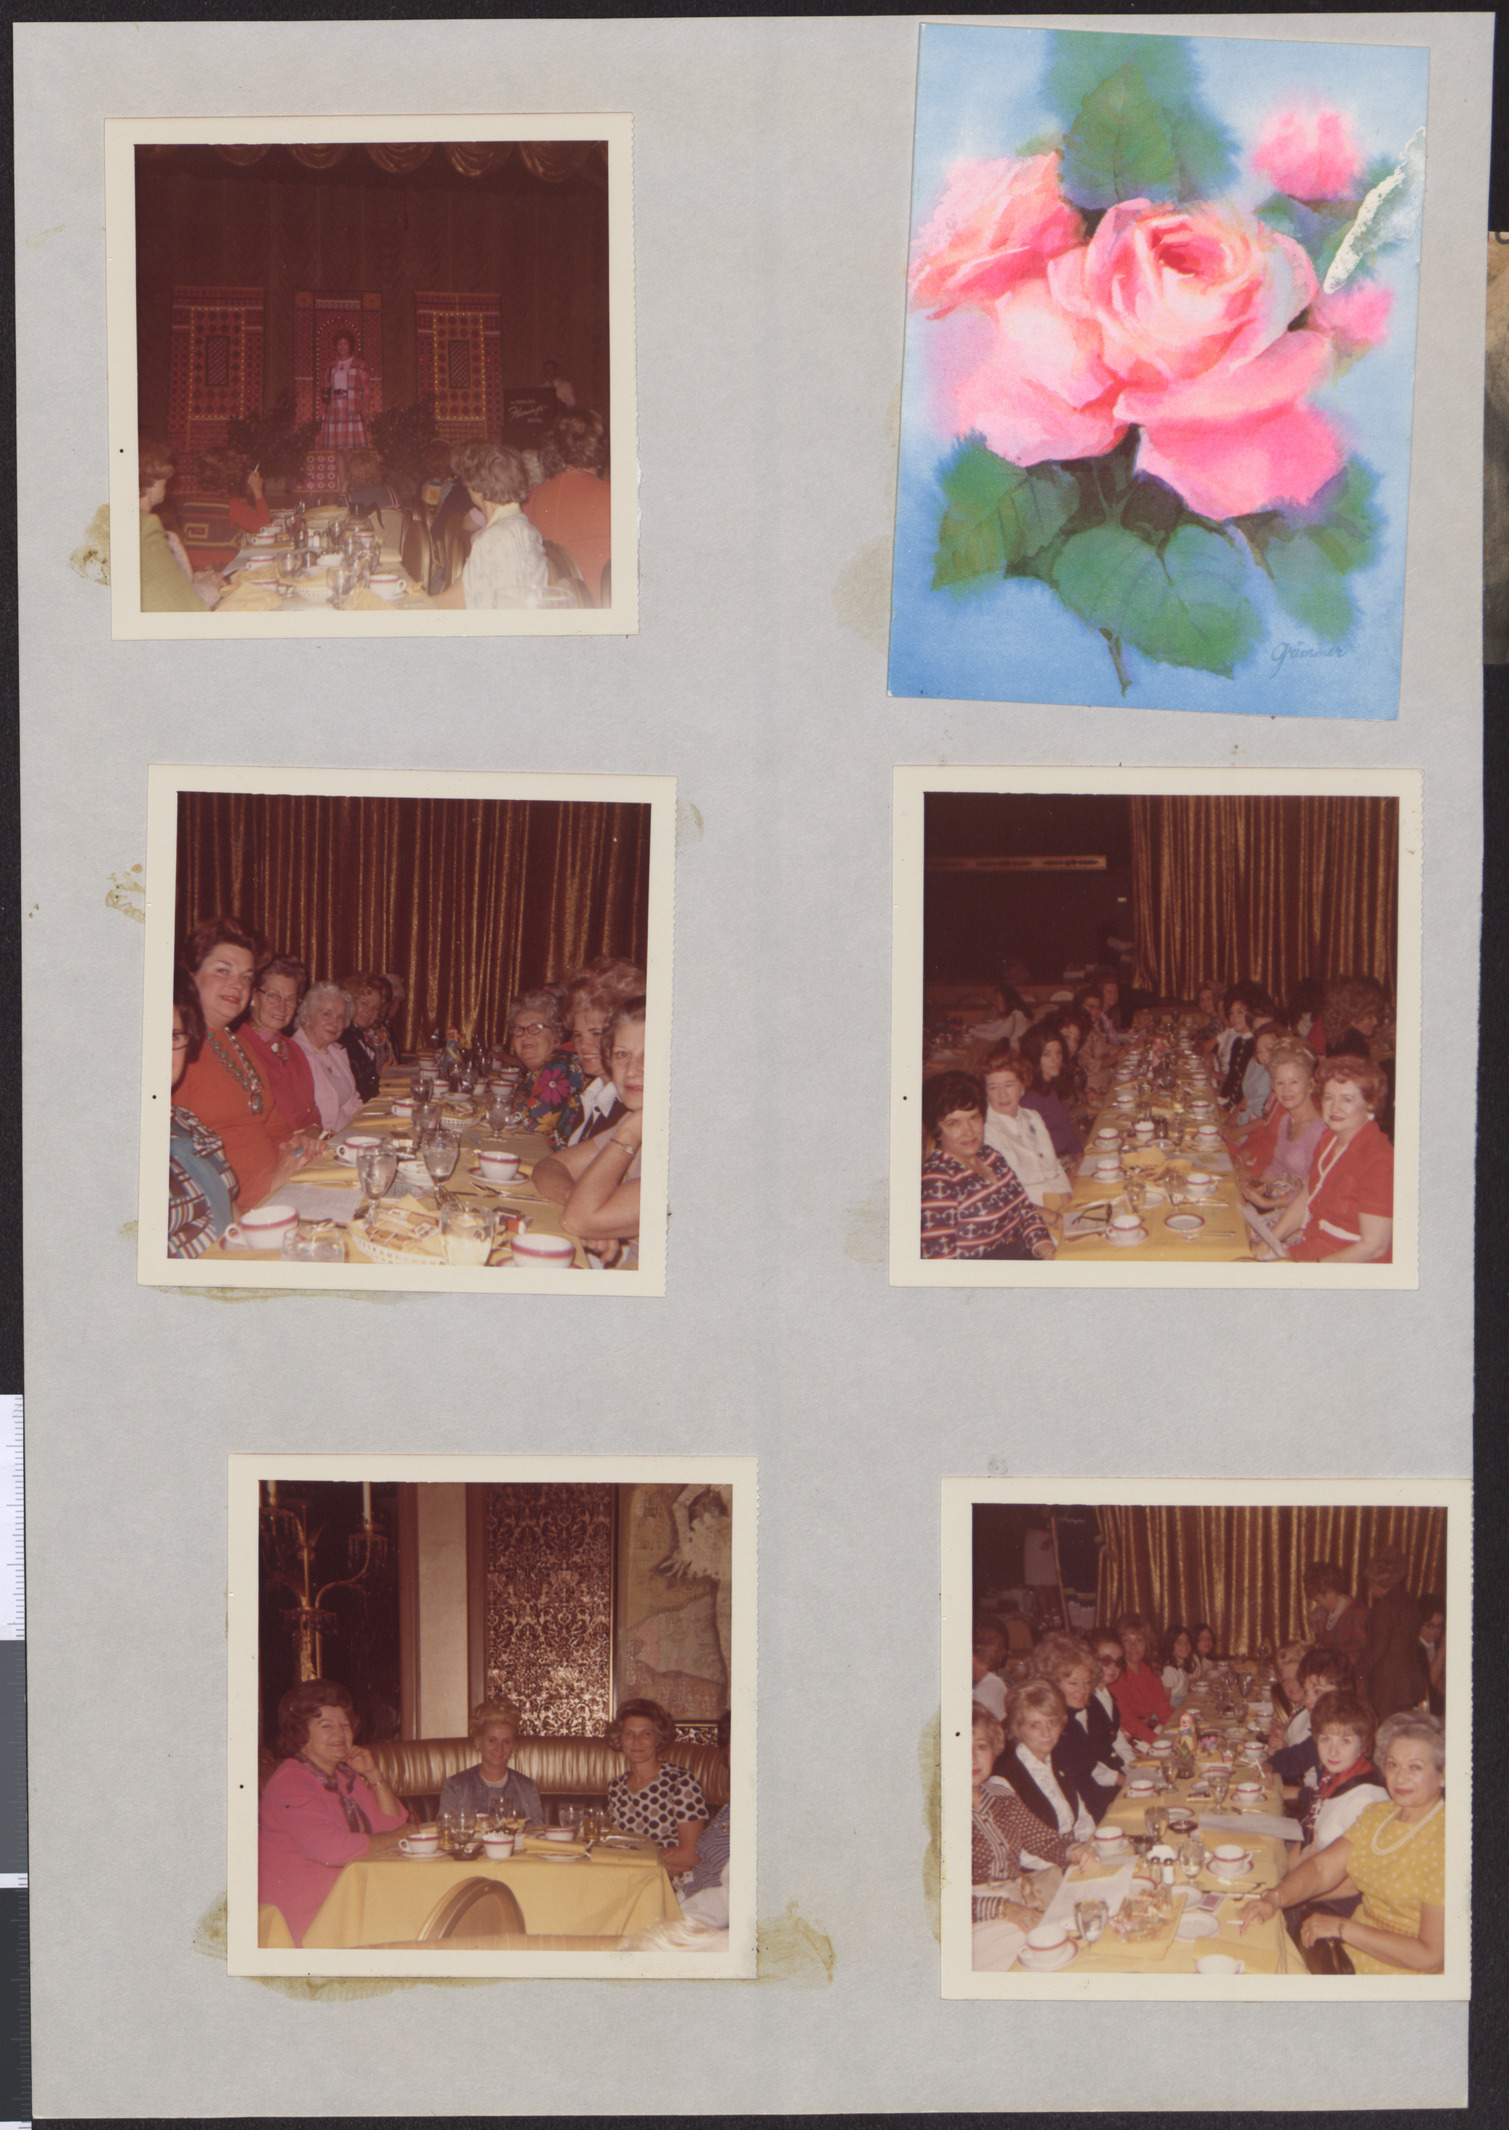 Photographs of Hadassah event, and greeting card